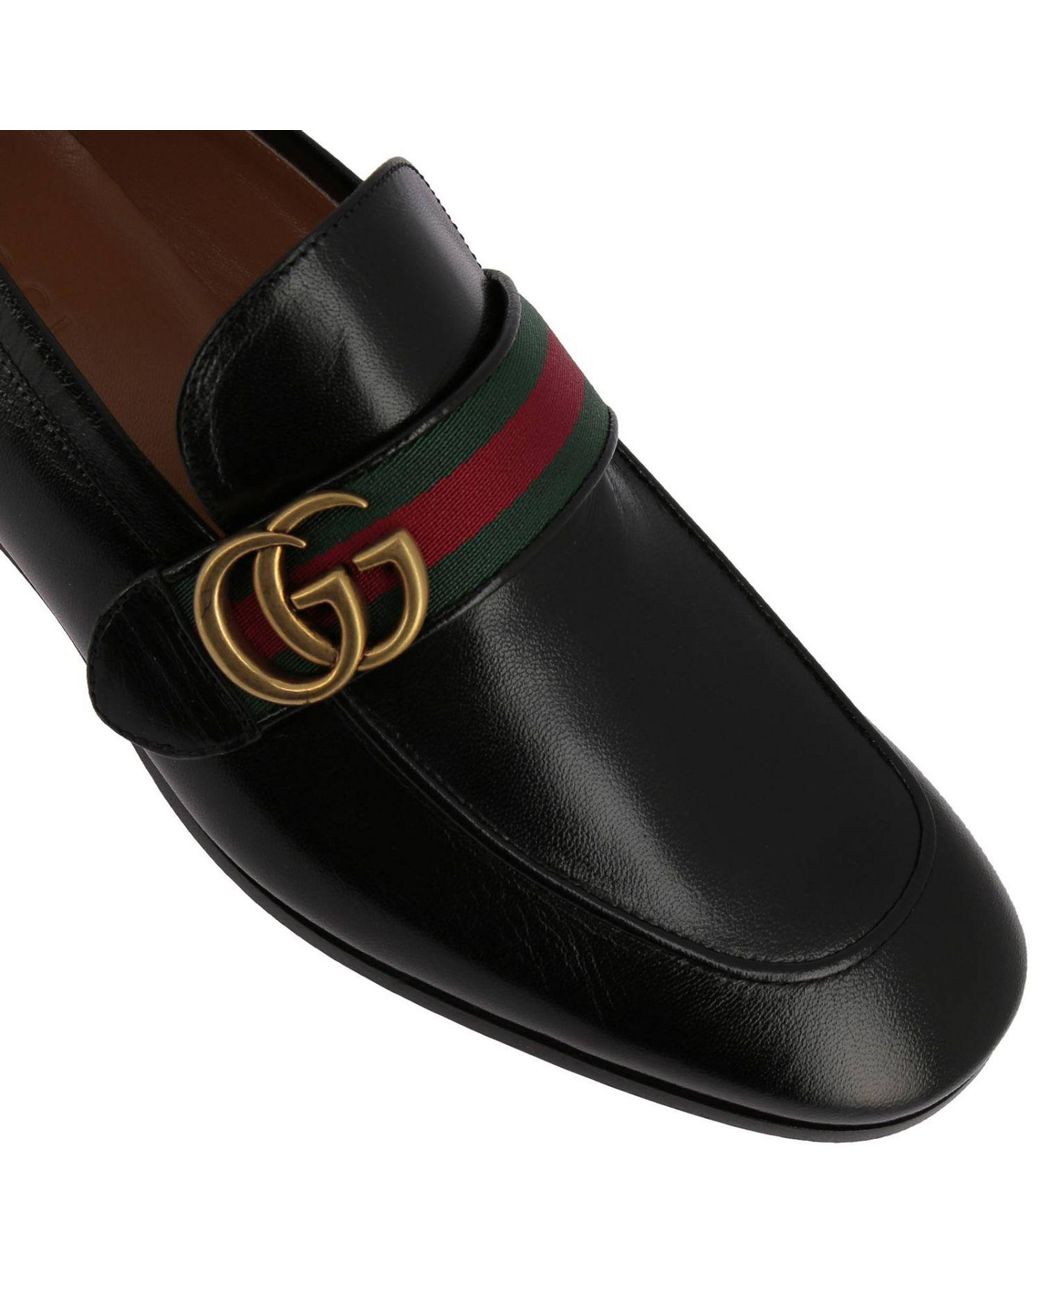 Gucci Loafers Shoes Men in Black for